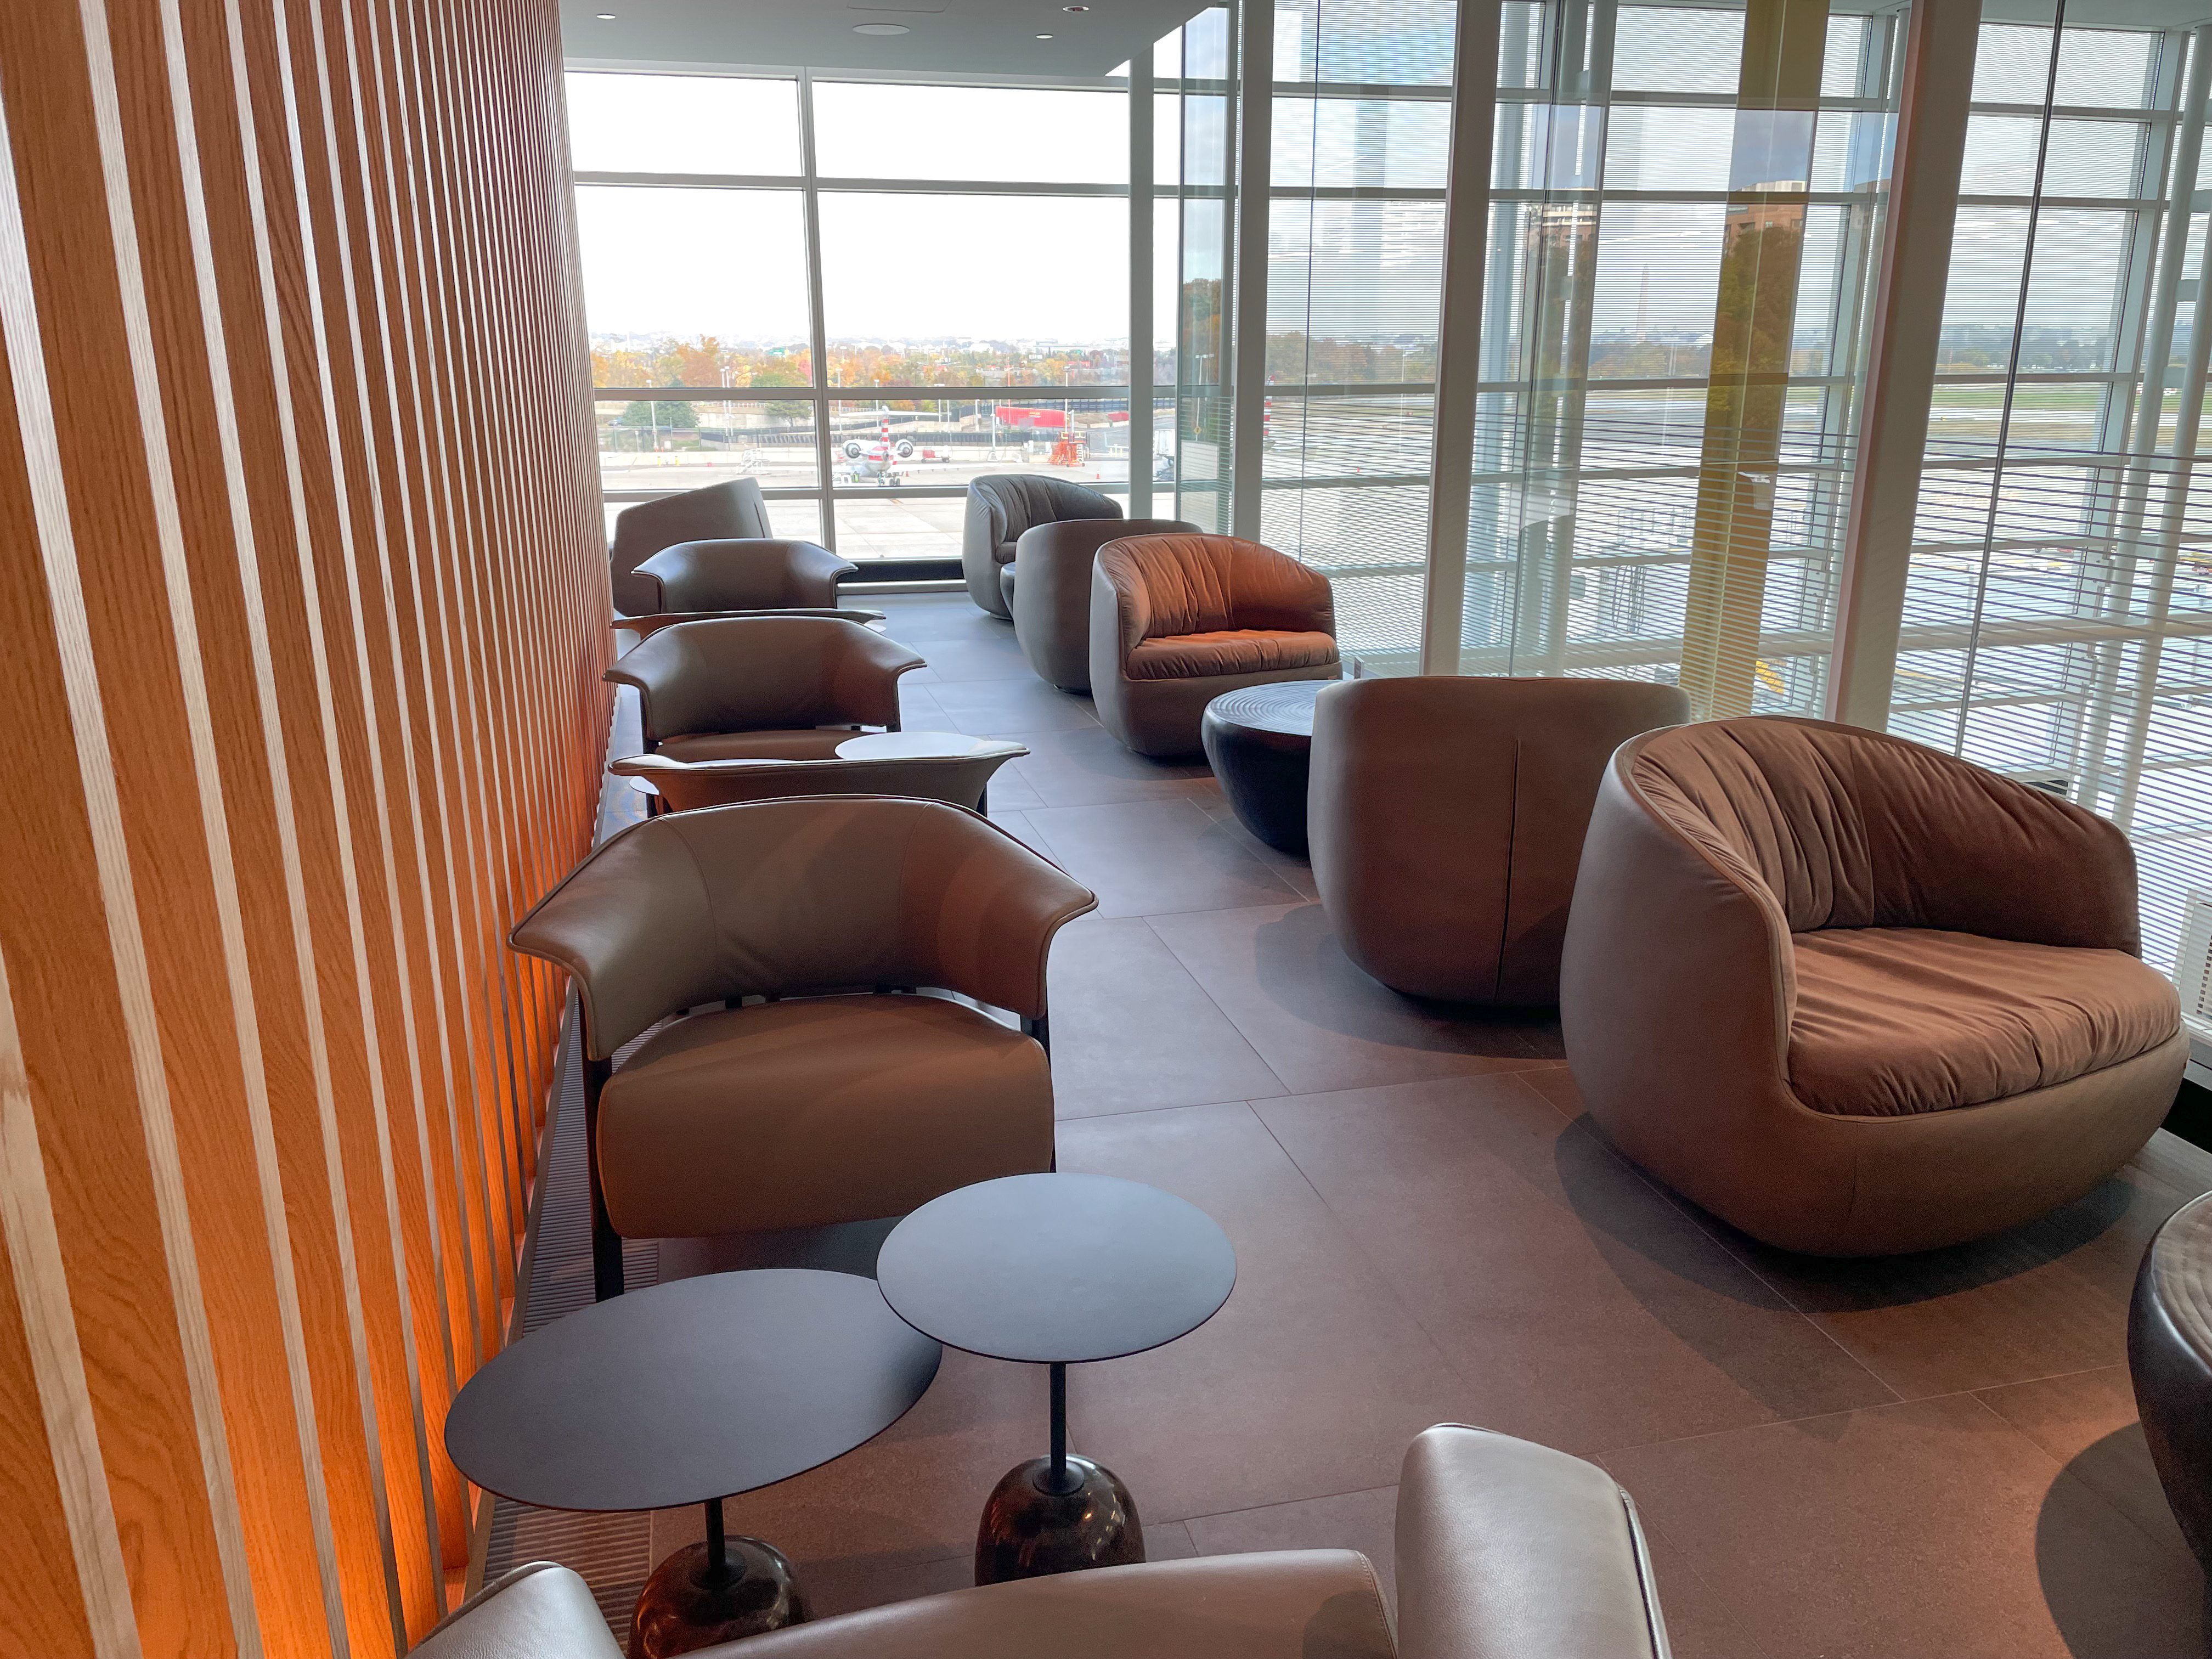 Additional seating at the Concourse E Admirals Club at Washington National Airport.